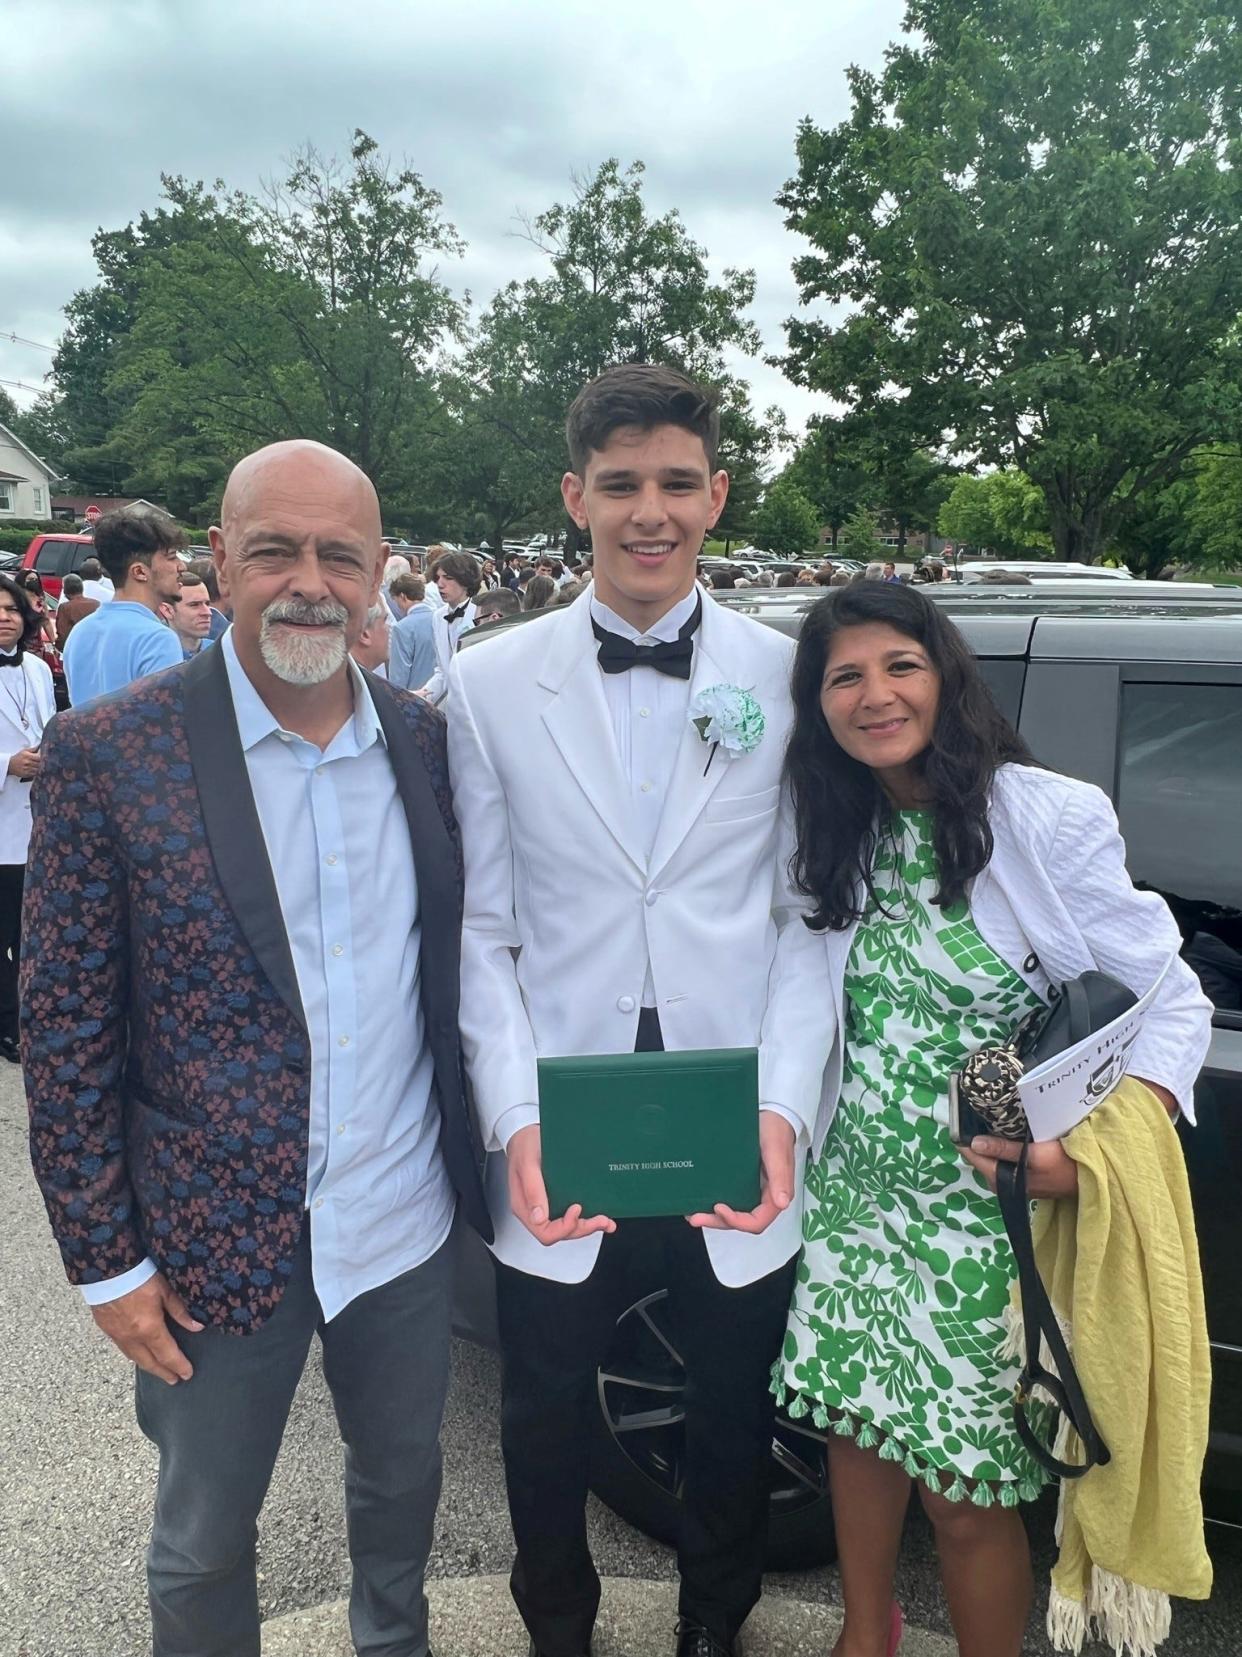 Carl, Gus and Terri Paige at Gus's high school graduation. Gus is the Paige's seventh child.